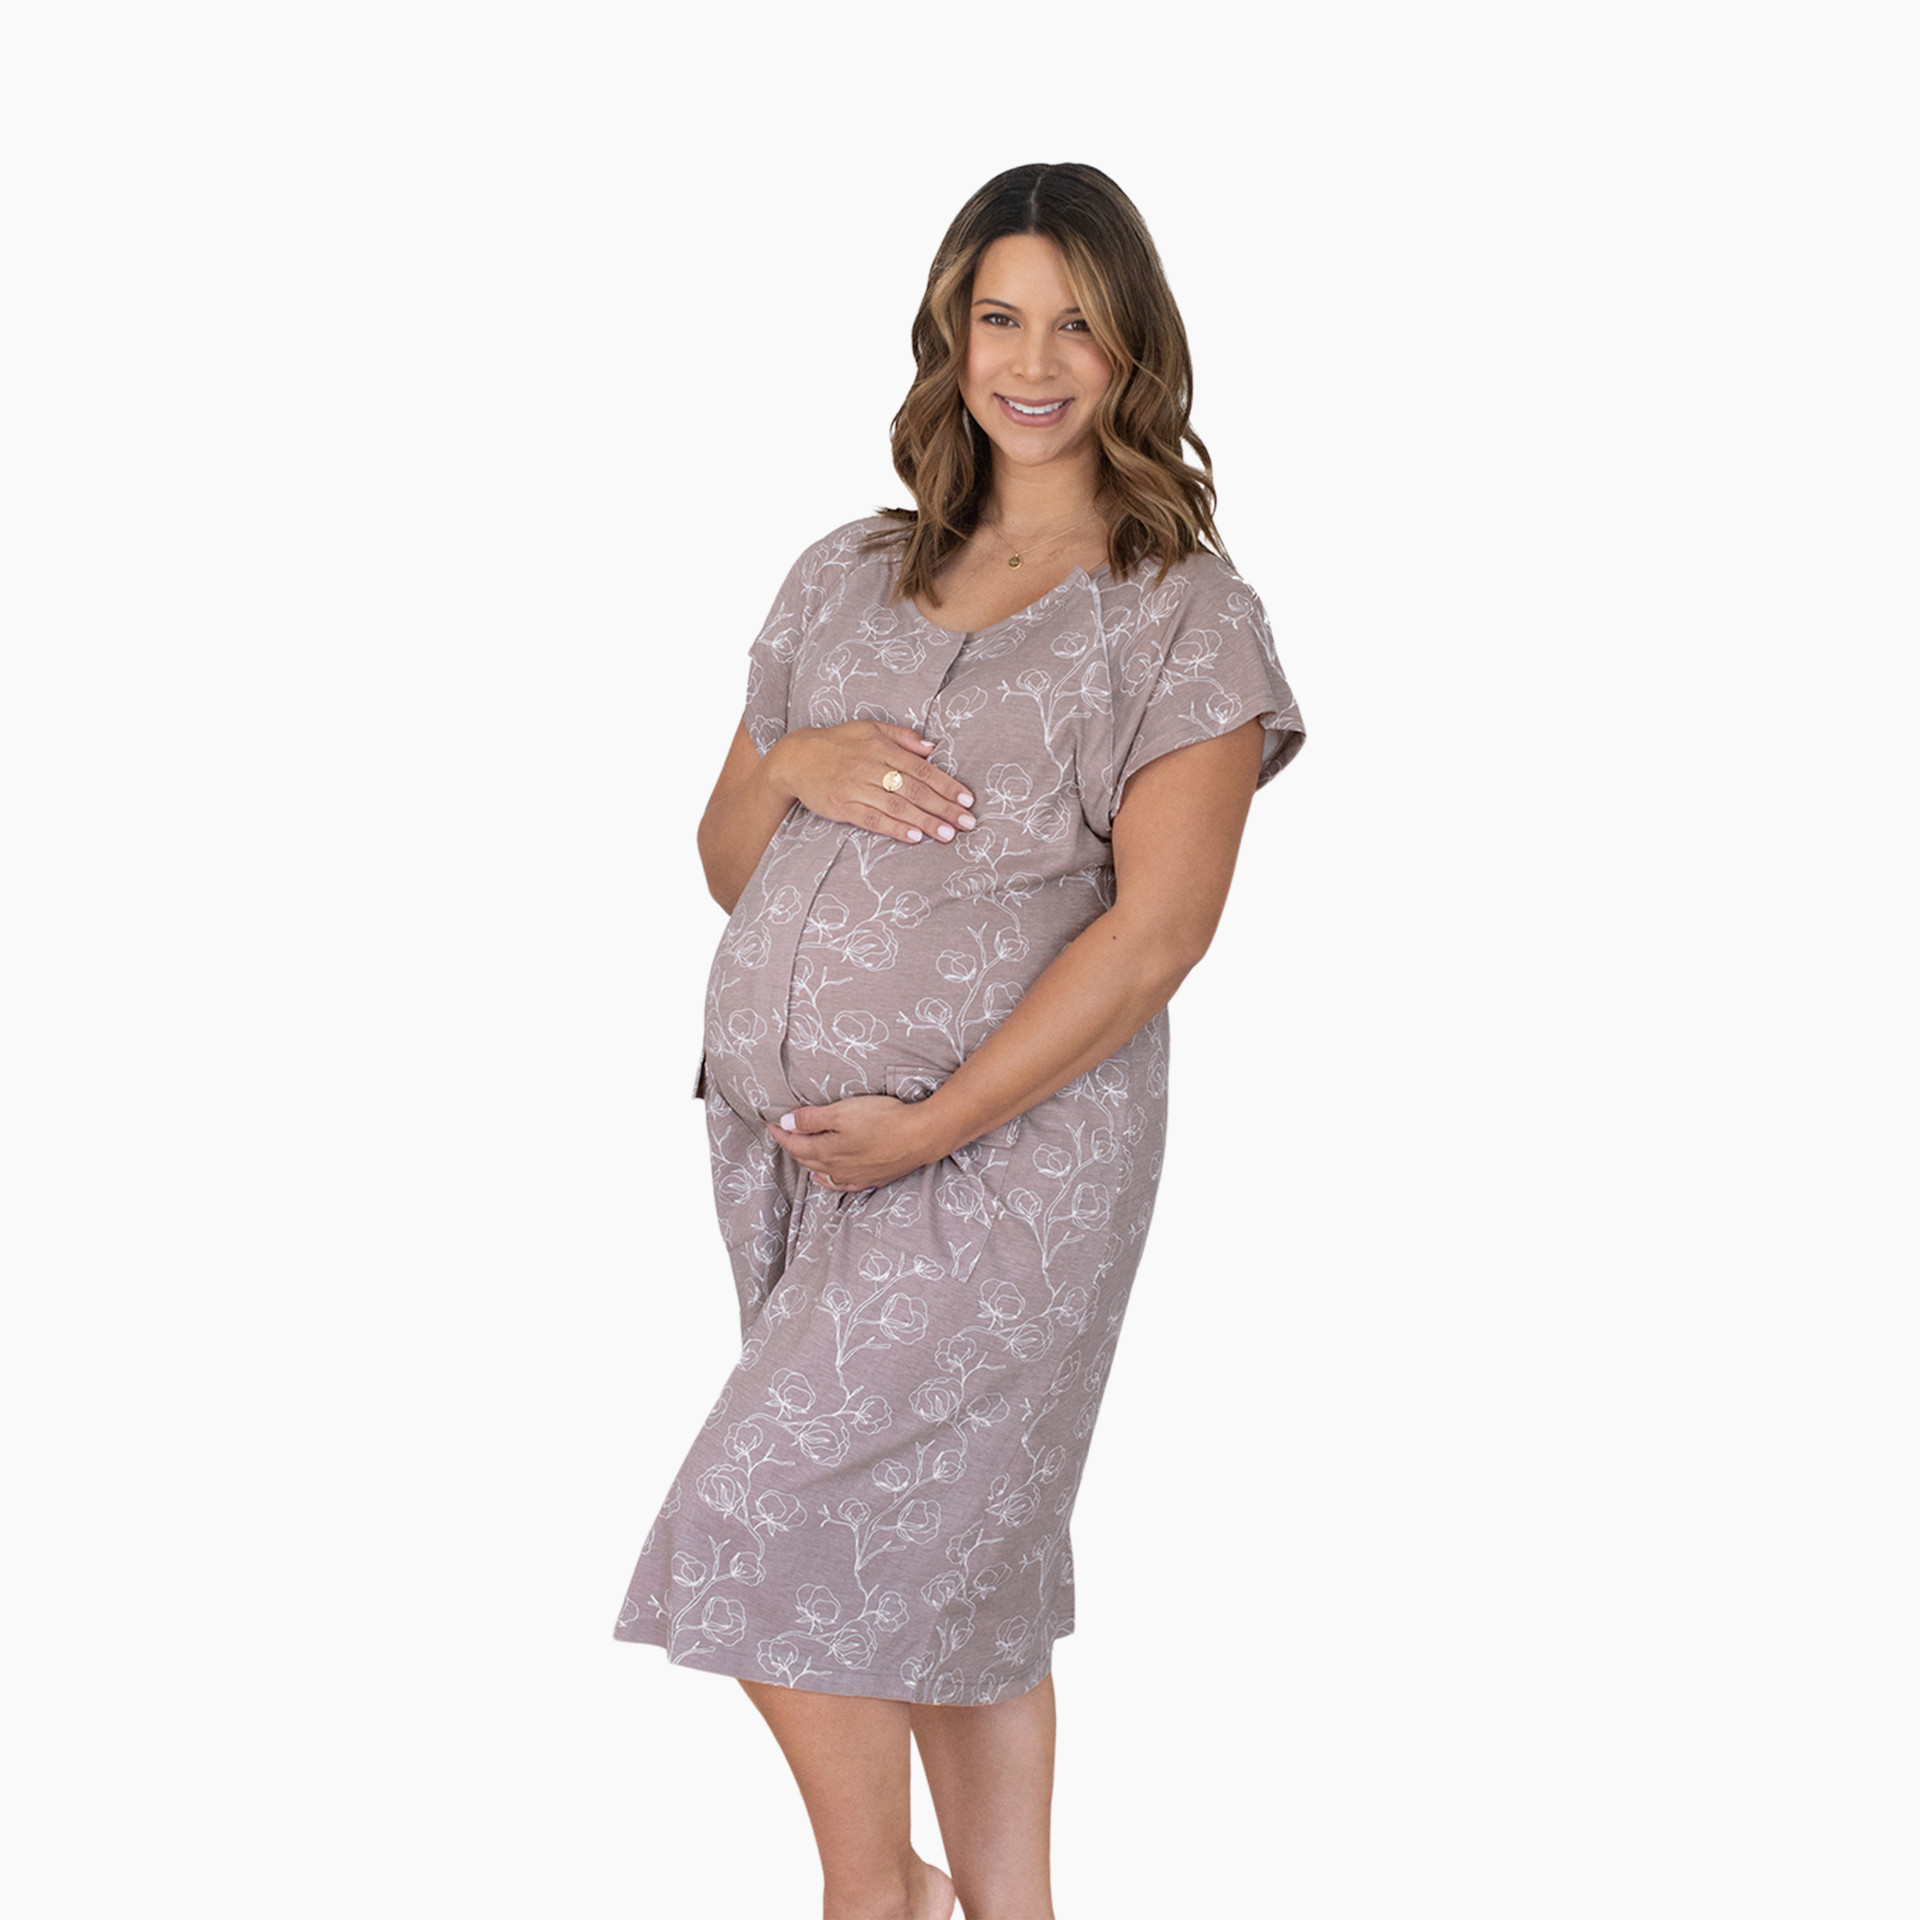 Kindred Bravely Universal Labor And Delivery Gown 3 In 1 Labor, Delivery,  Nursing Gown For Hospital (Fern, Xl-Xxl)